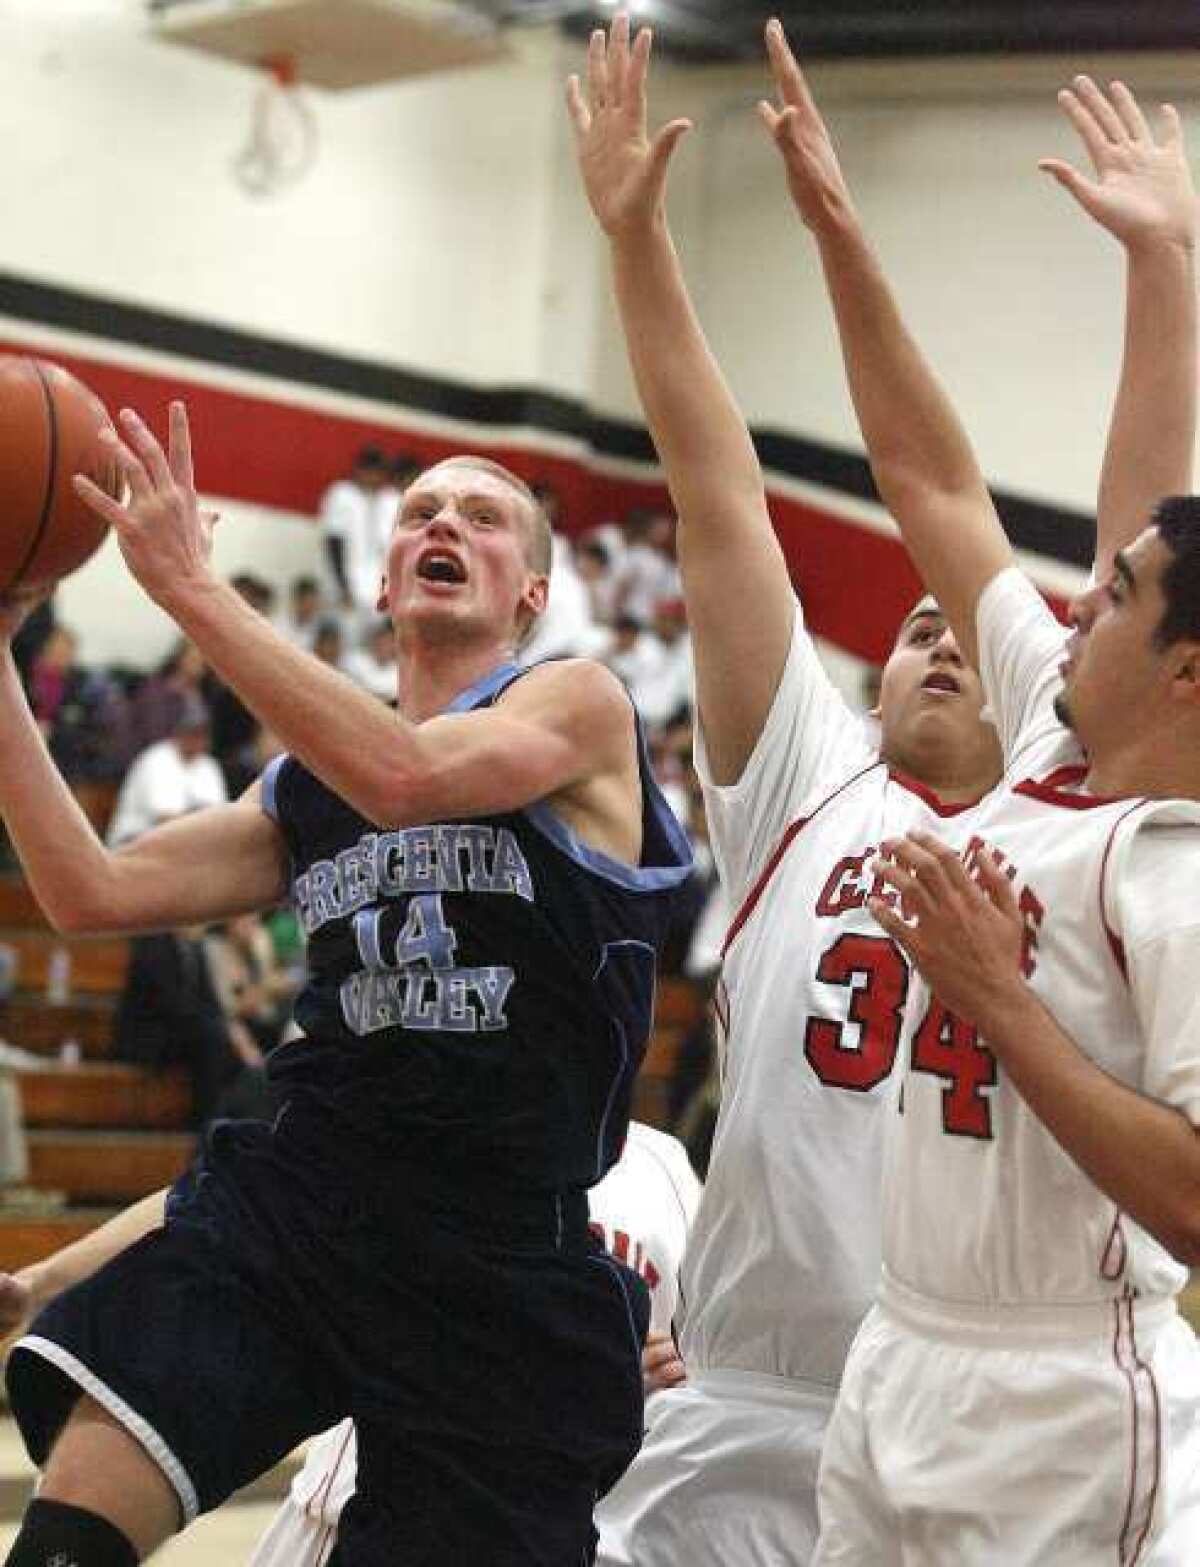 Crescenta Valley's senior guard Cole Currie, left, finished with 34 points to help the Falcons improve to 2-0 in the Pacific League.